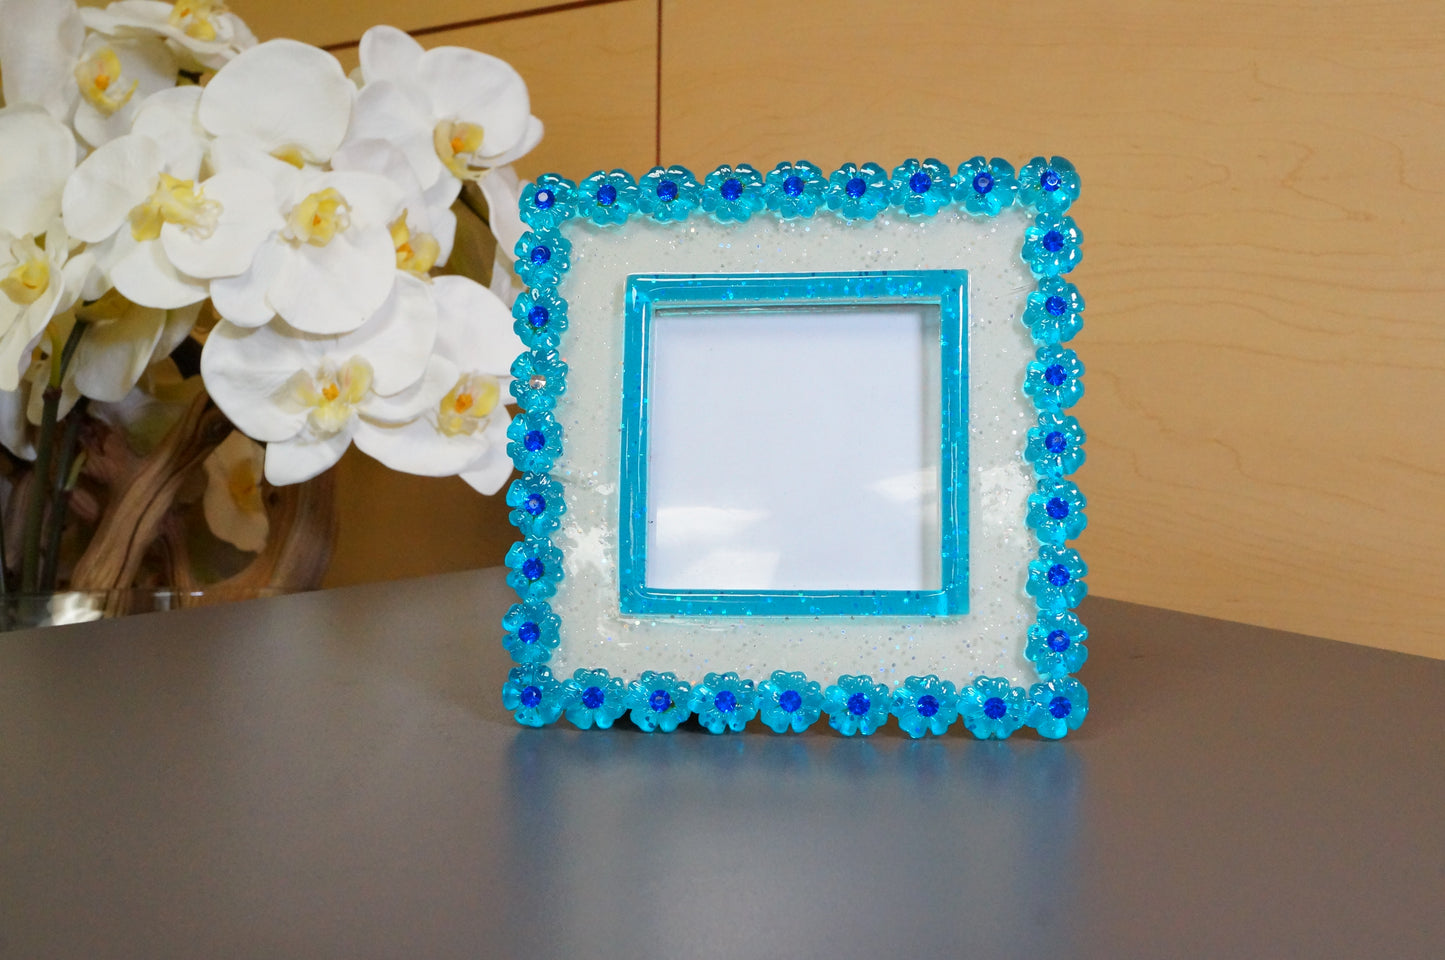 Square Shaped Acrylic Flower Detail Free Standing Desk Photo Frame 3"x3"